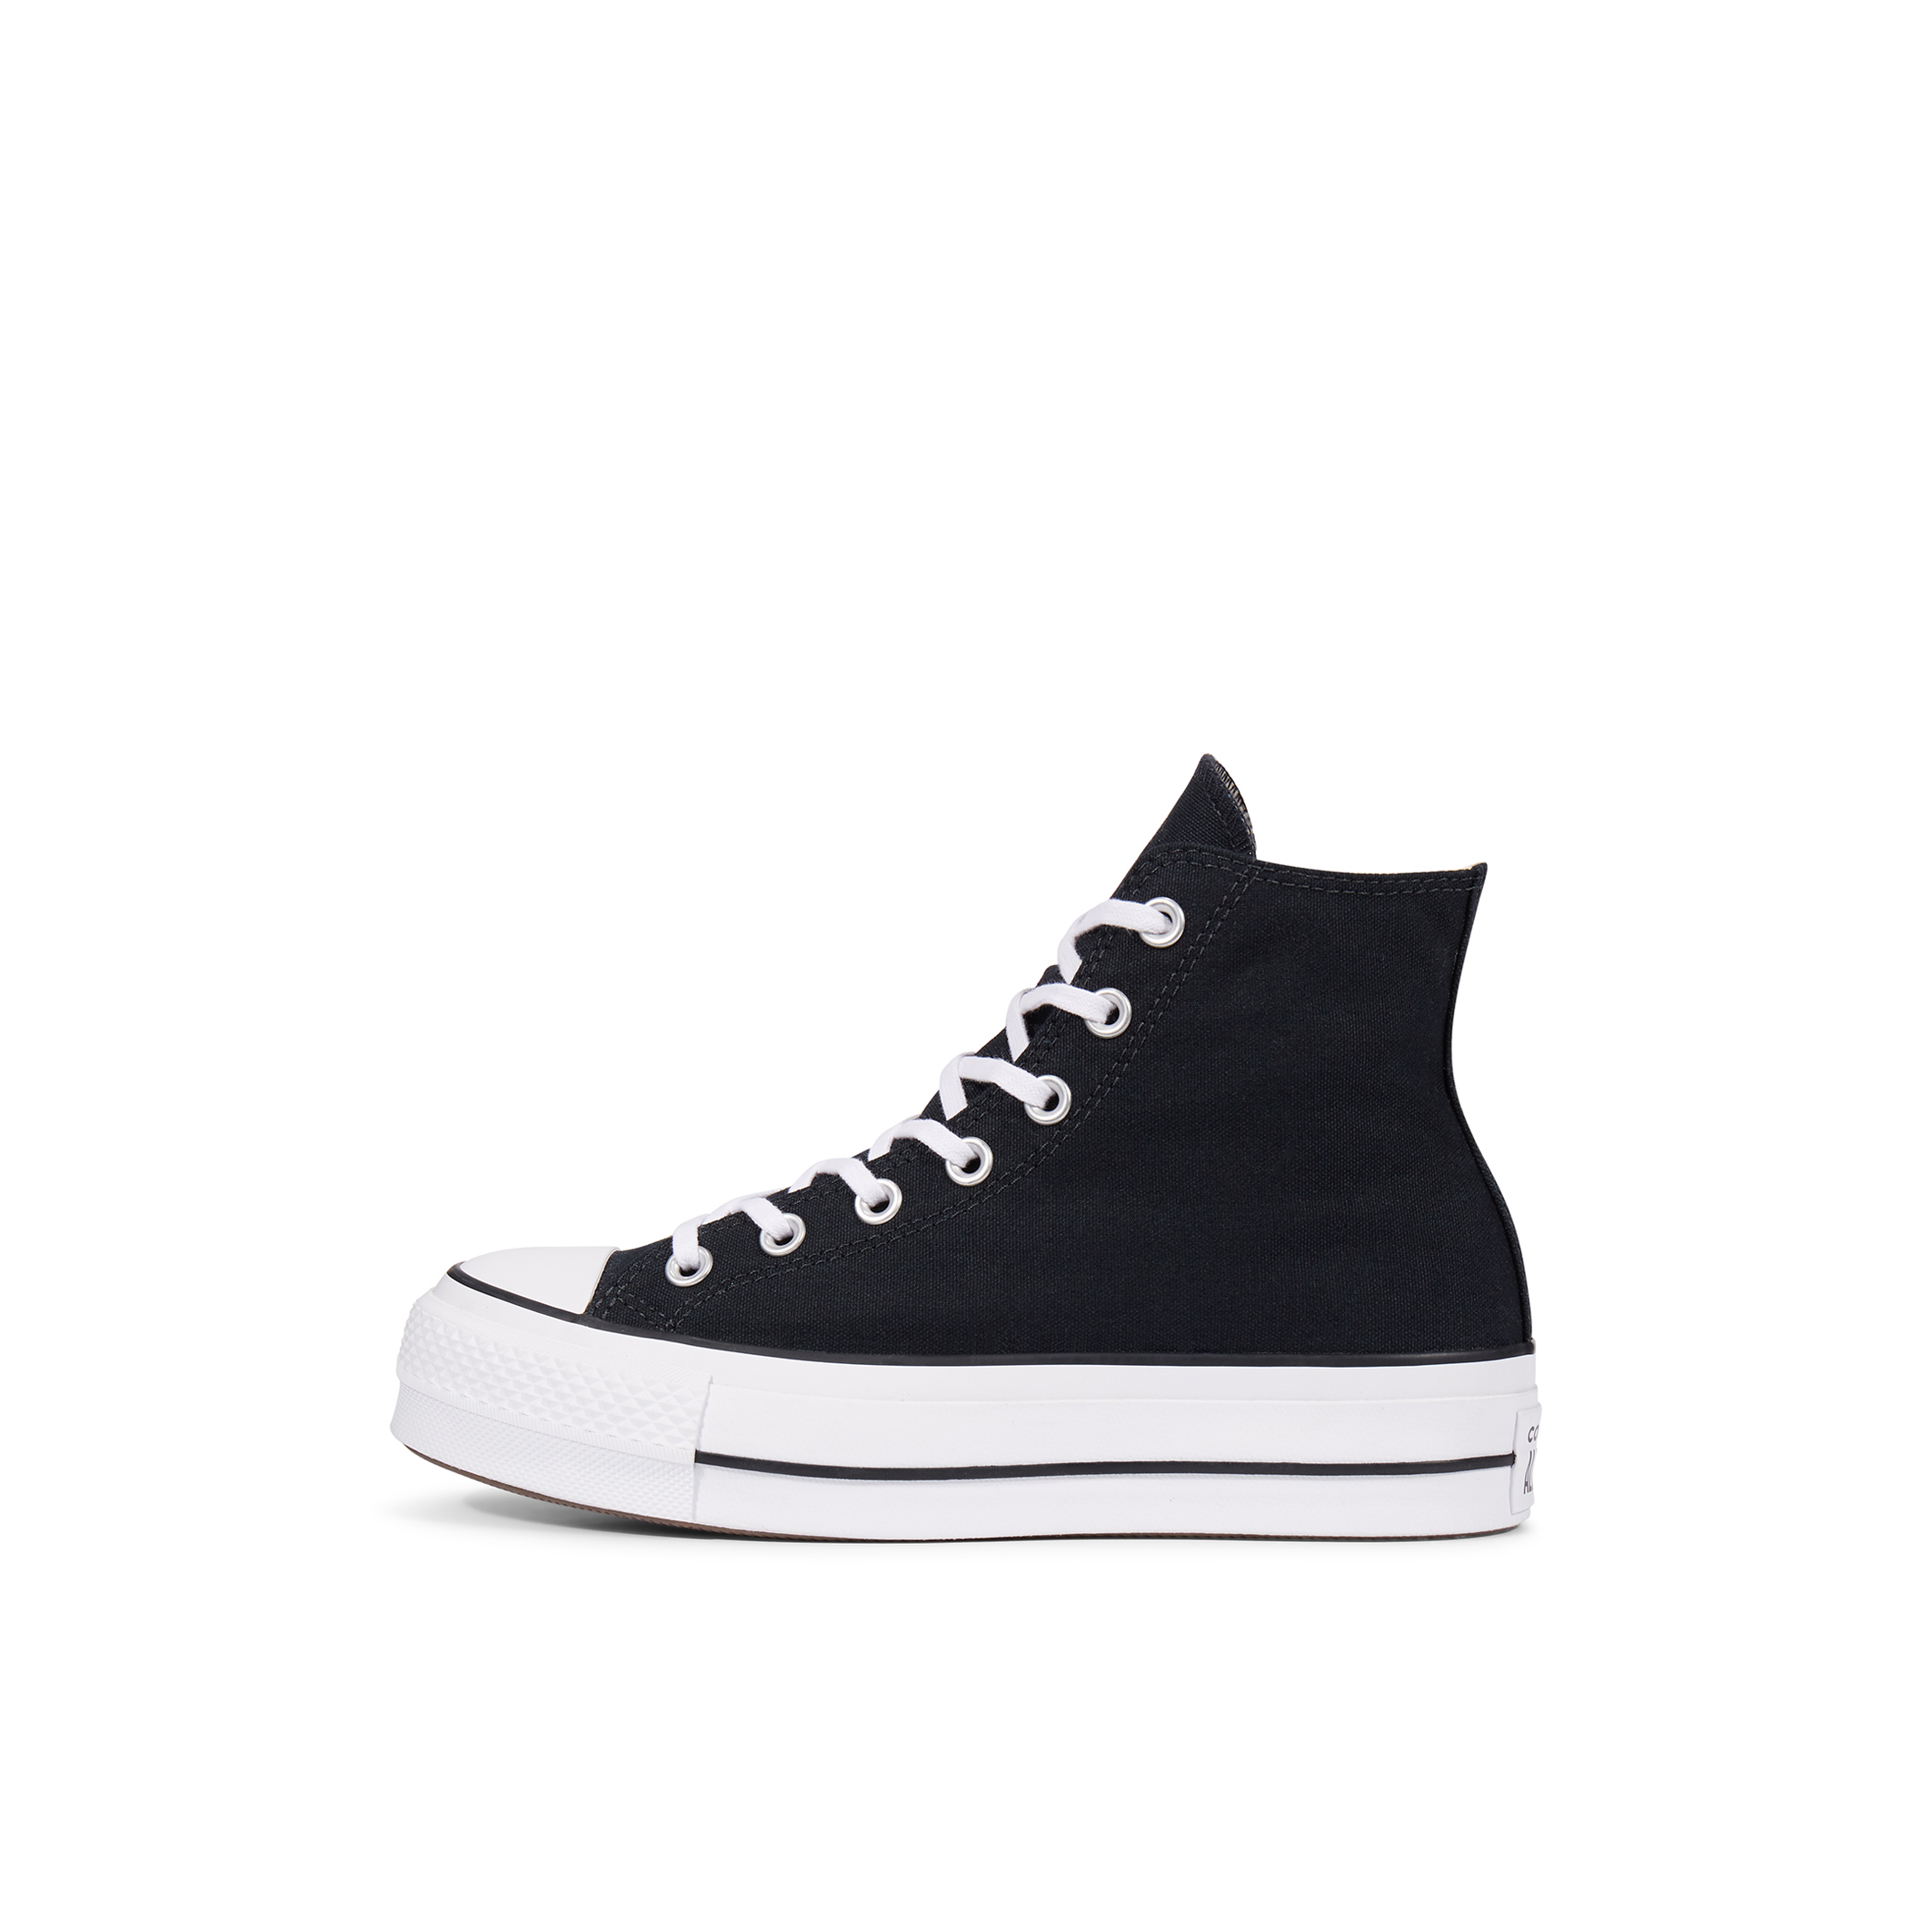 Chuck taylor all star lift canvas high top flatform trainers , black,  Converse | La Redoute